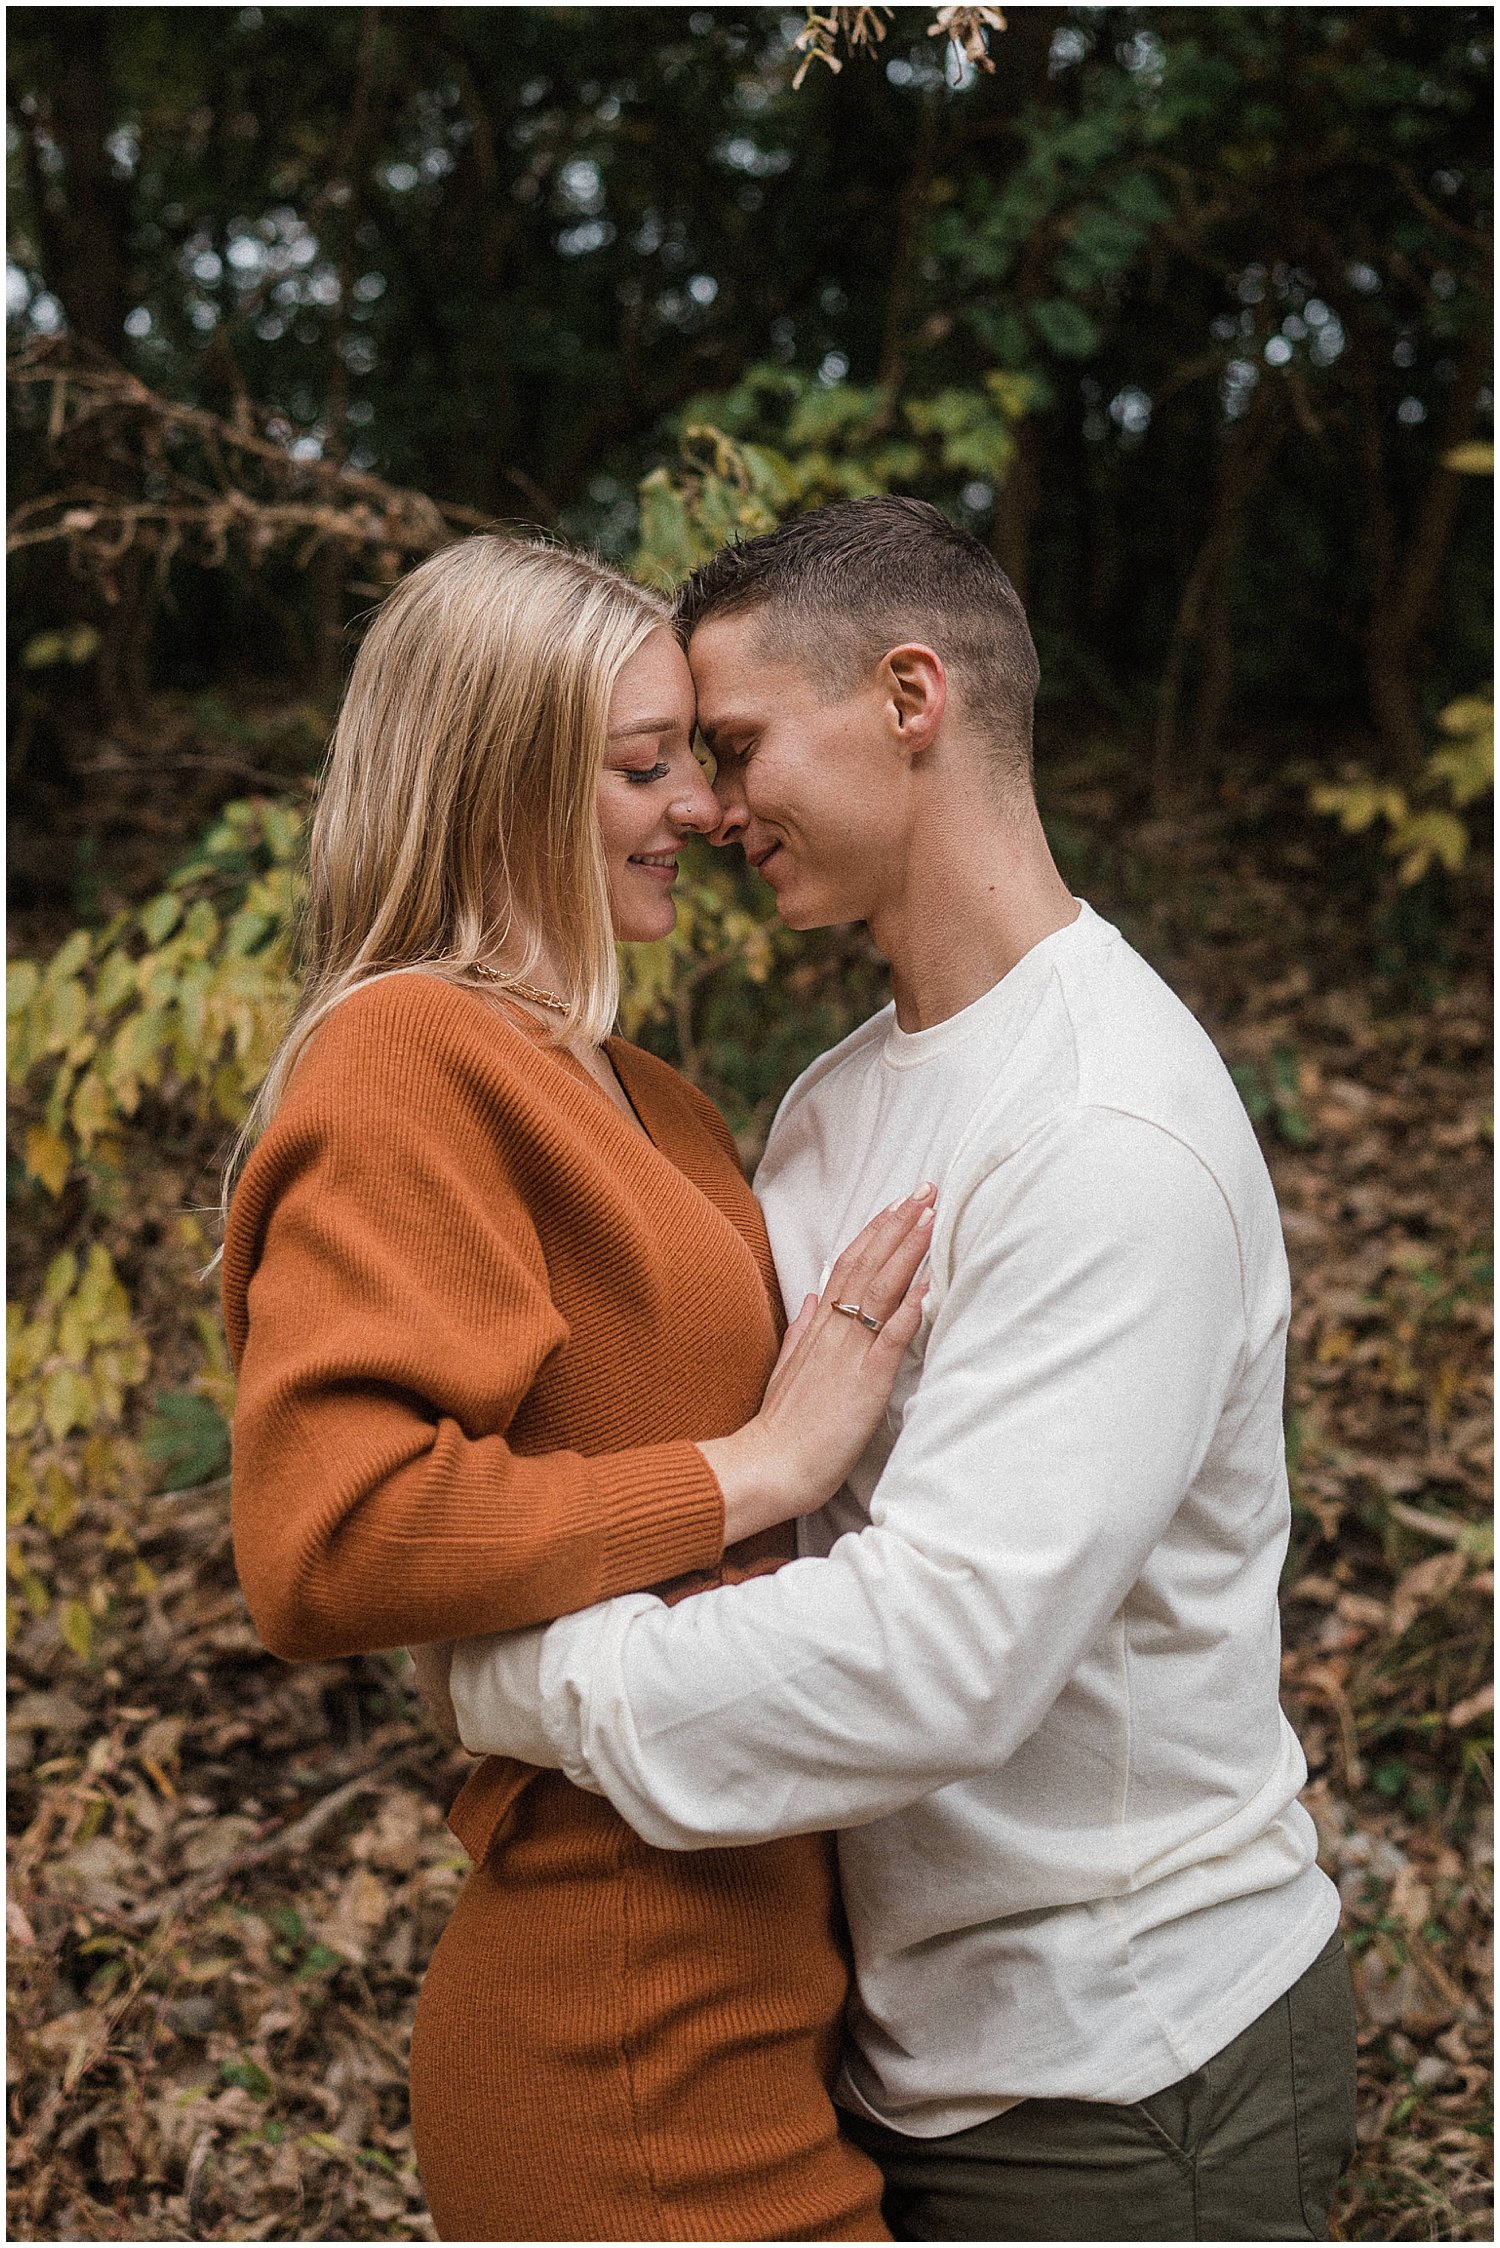 dayton portrait photographers_chelsea hall photography_kayla & eric_miamisburg proposal and pregnancy announcement session_0057.jpg